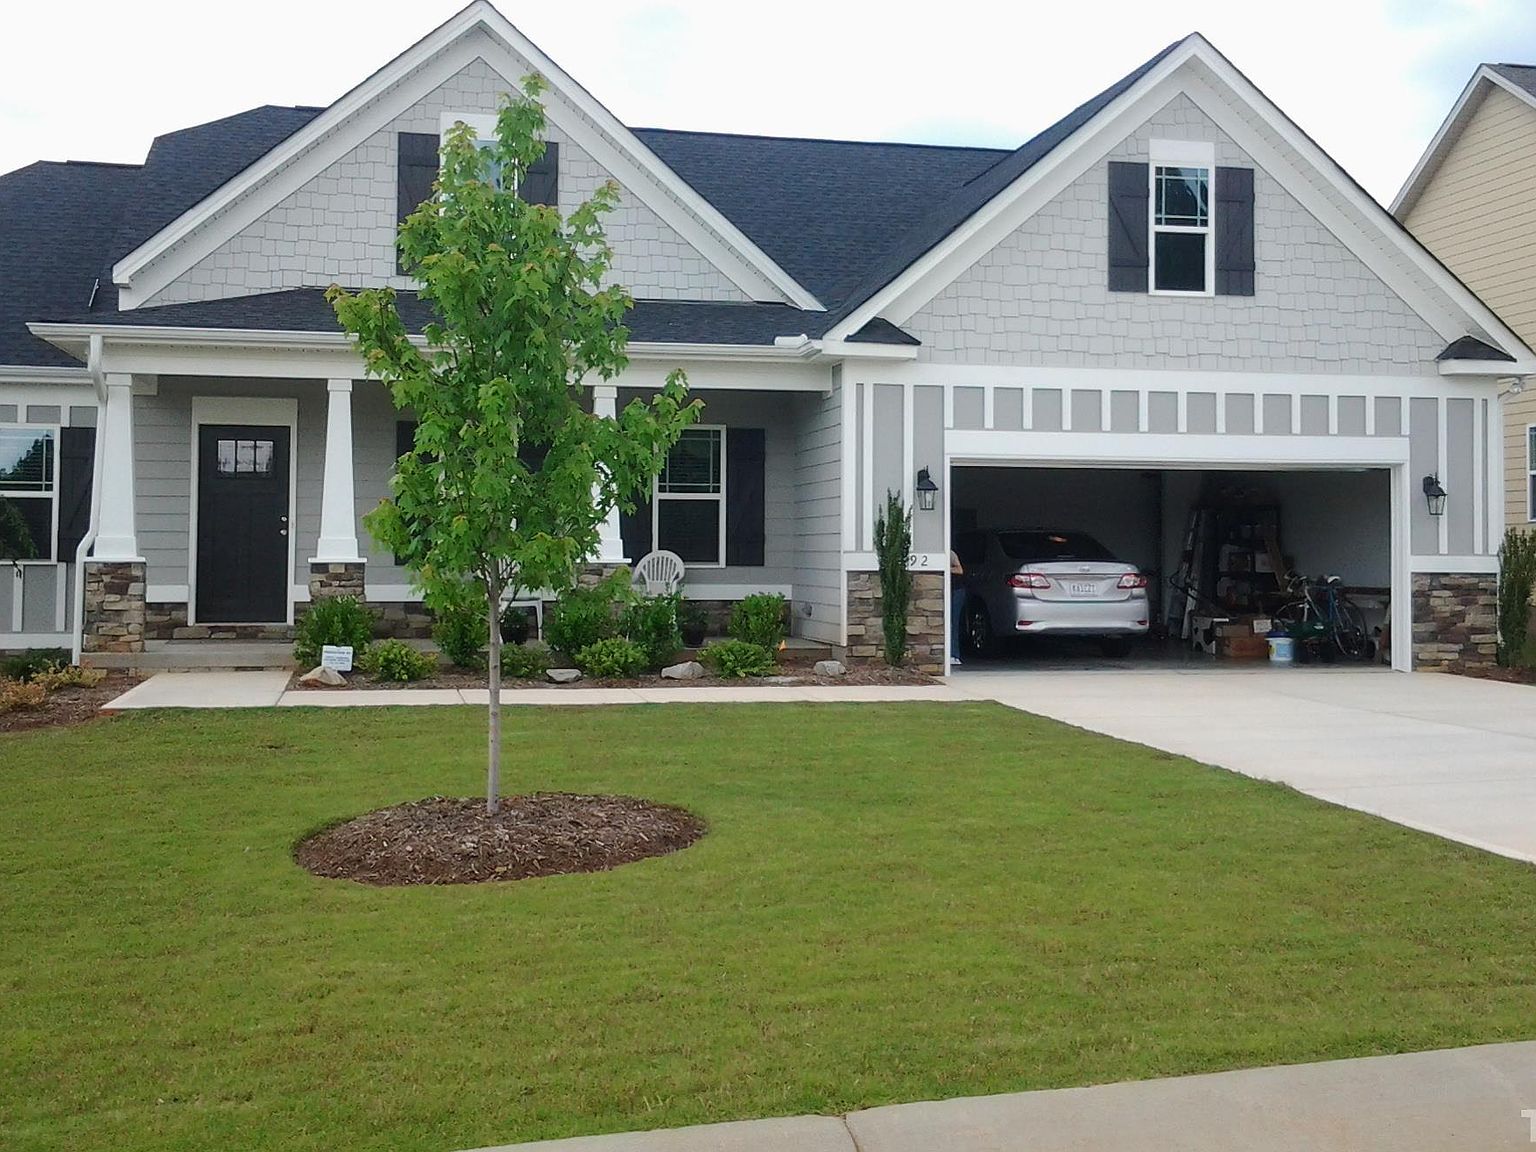 492-airedale-trl-garner-nc-27529-zillow